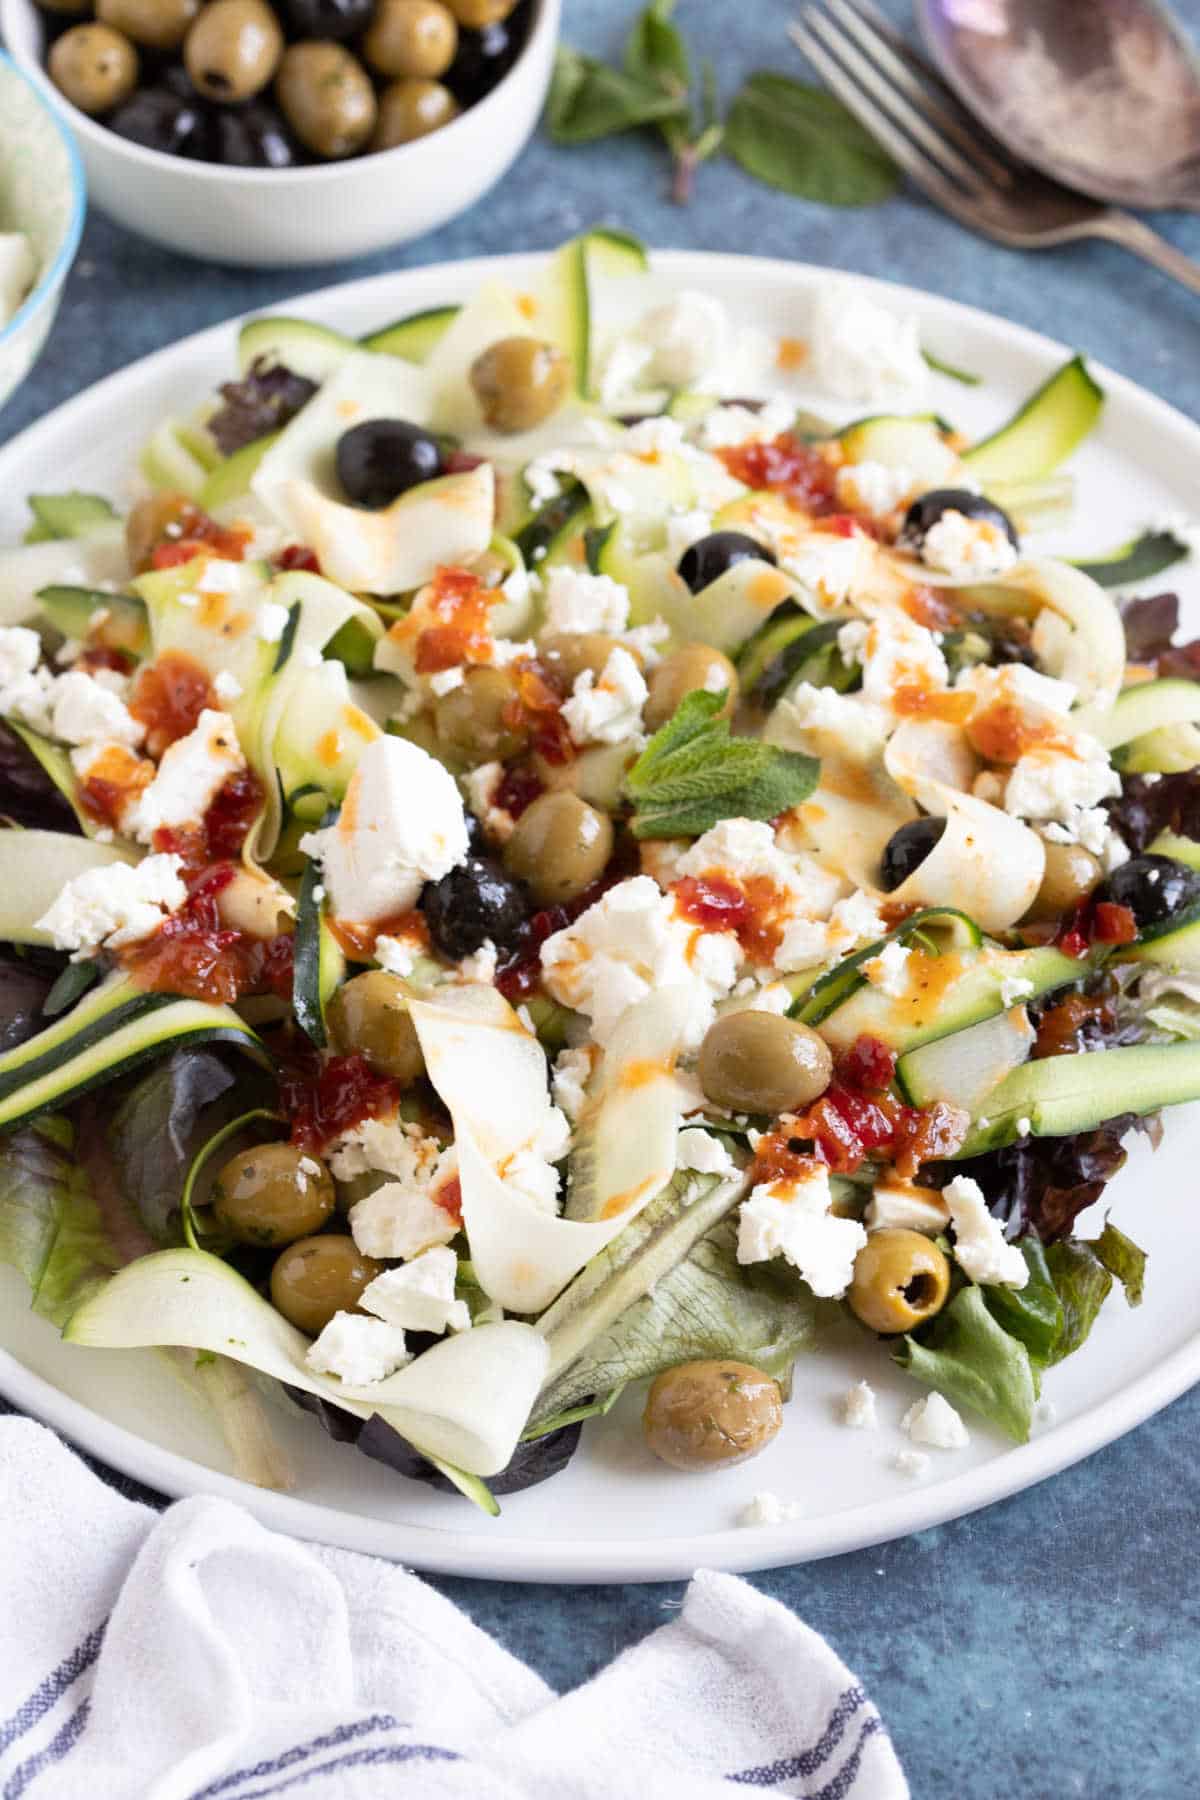 Courgette, feta and olive salad.